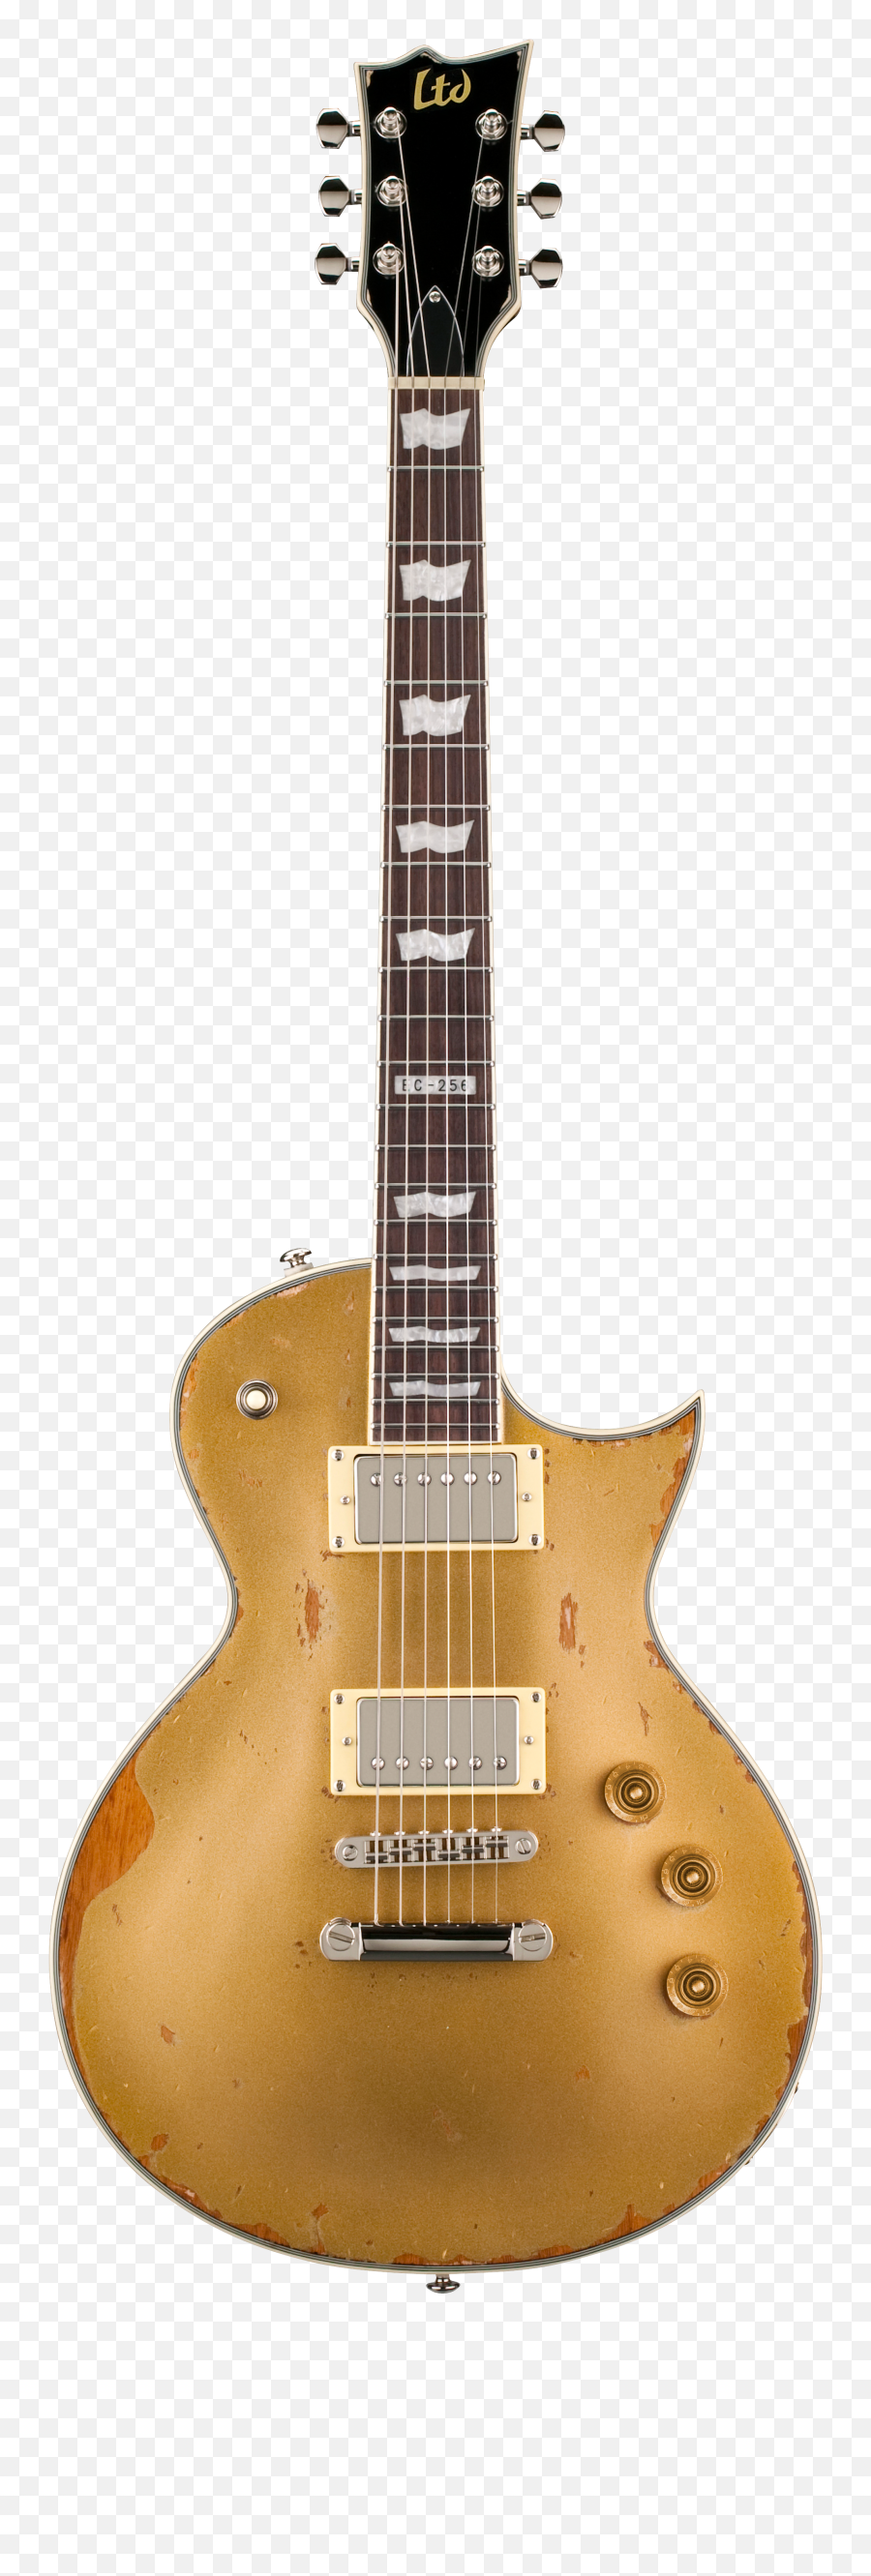 Guitar Png Images Free Picture Download - Gold Electric Guitar Png,Bass Png